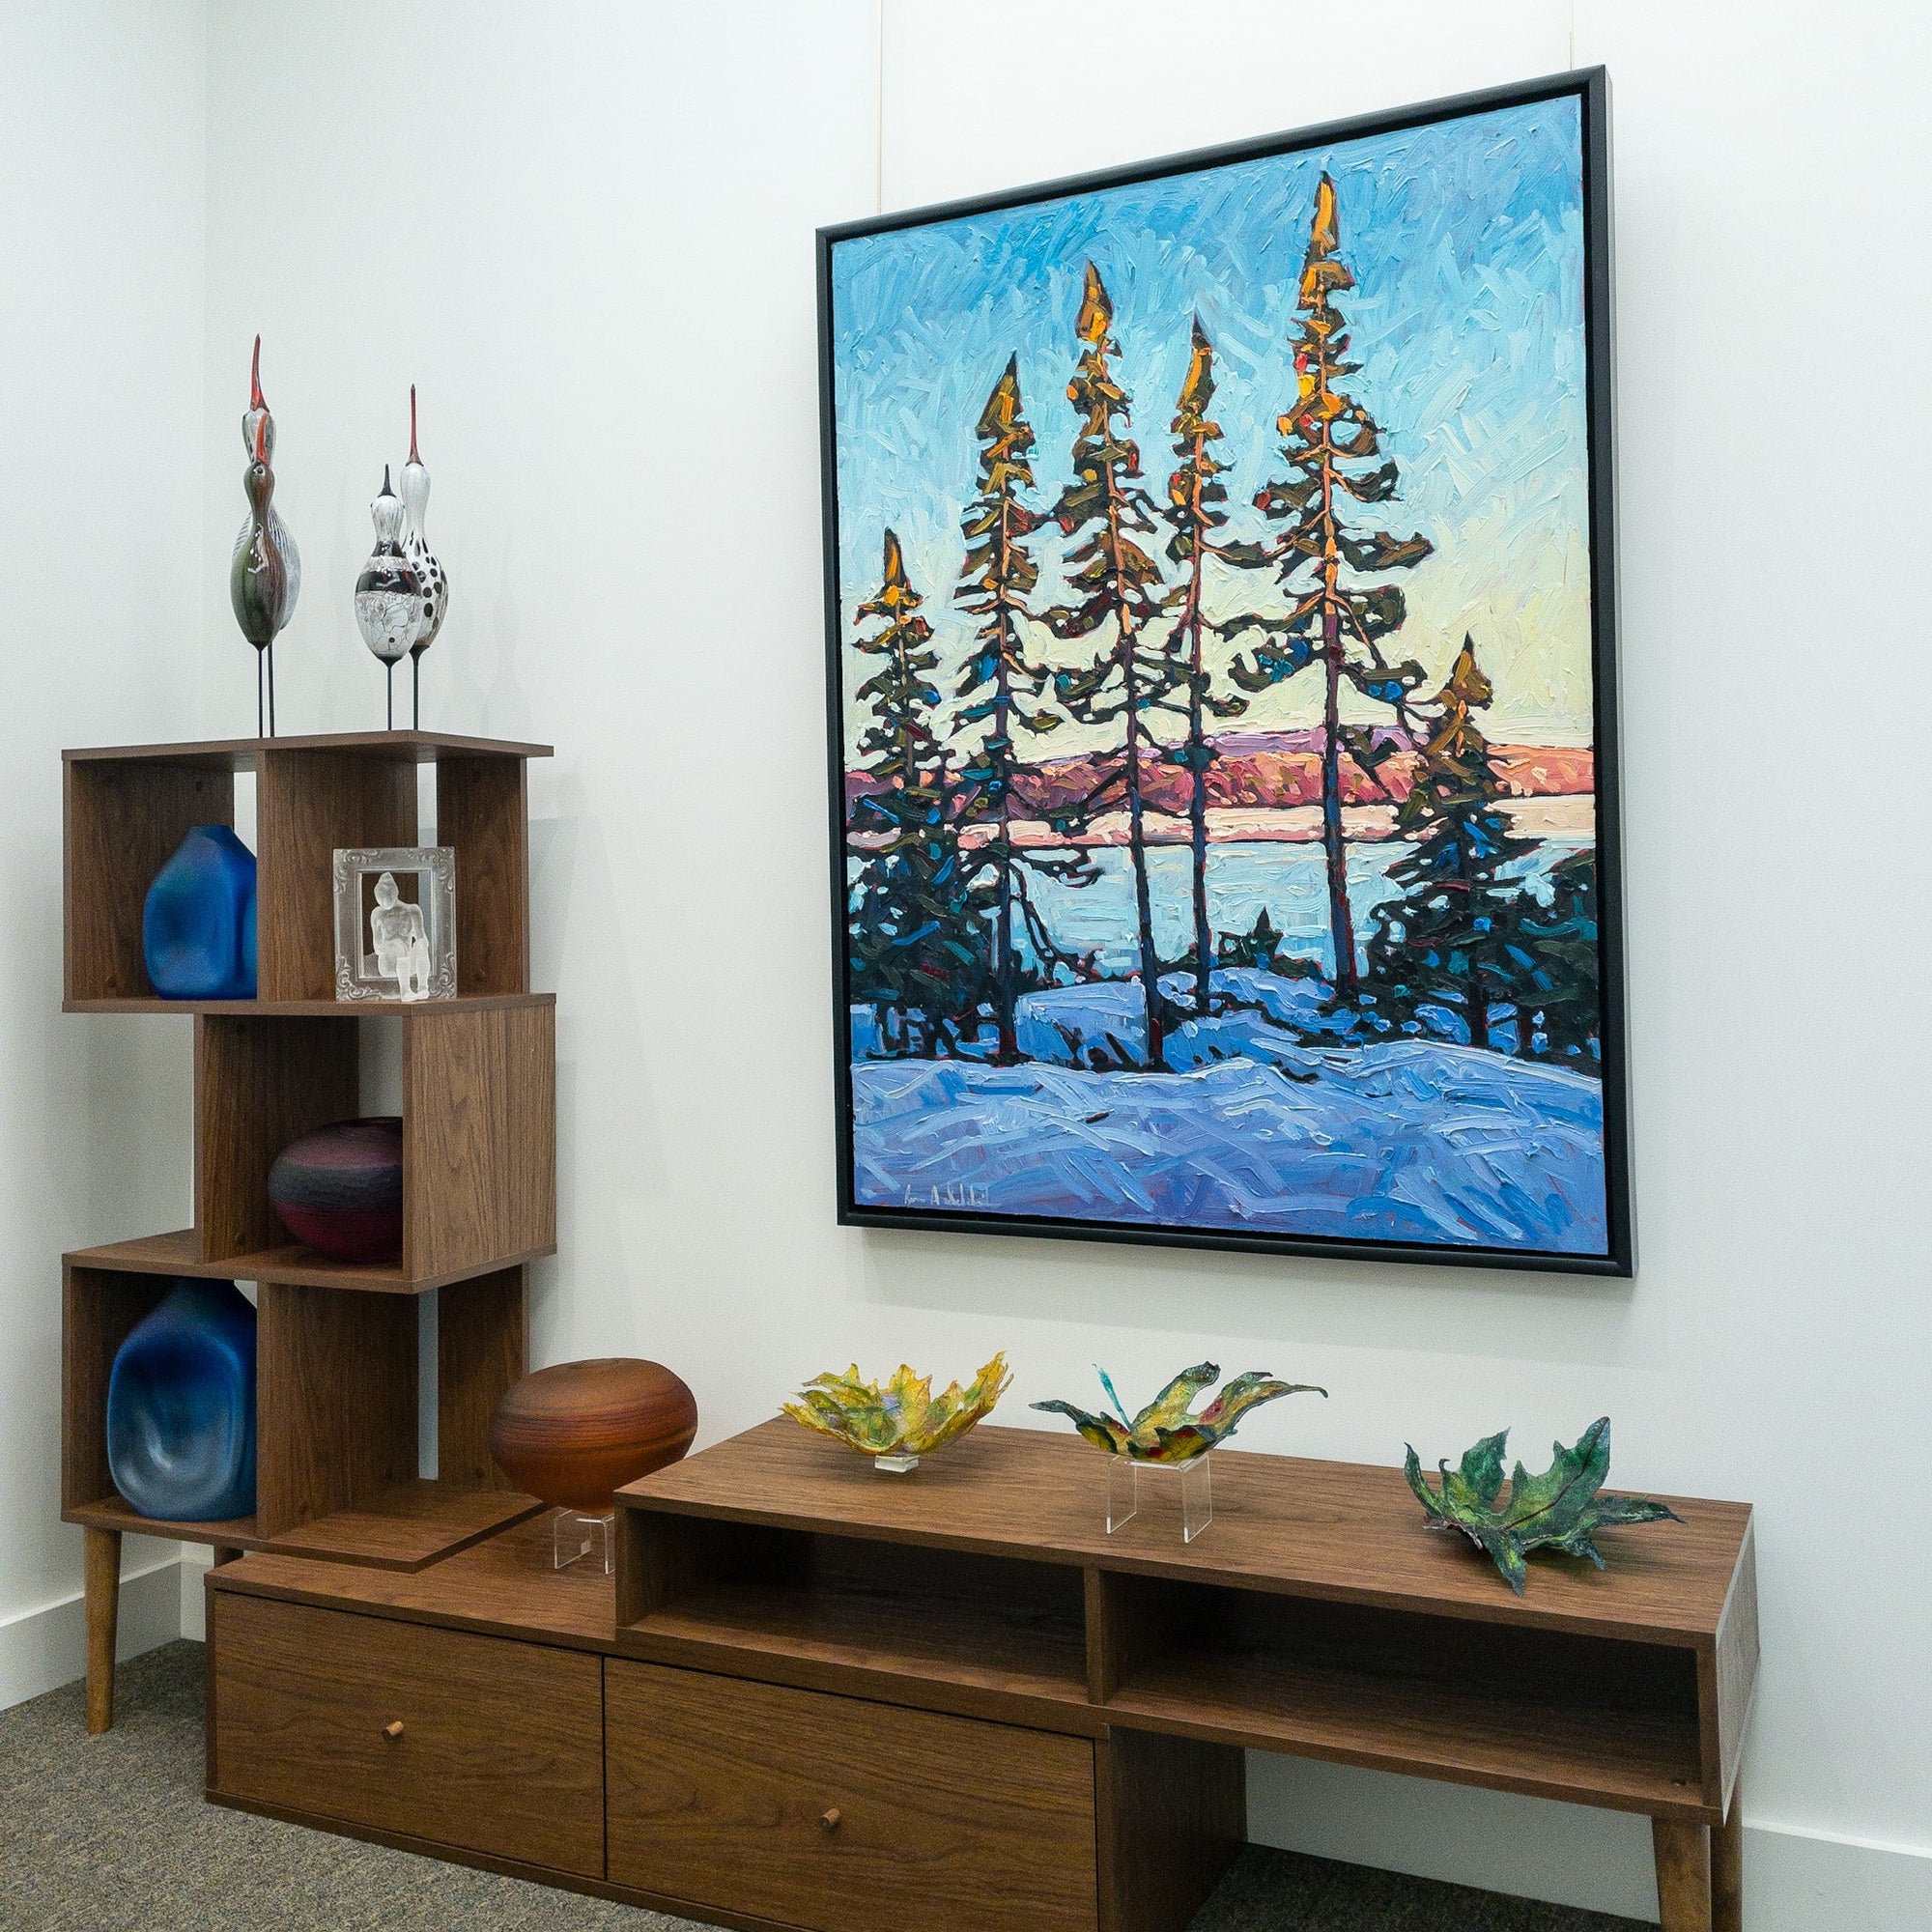 Stately Pines on Lake Superior | 48" x 36" Oil on Canvas Ryan Sobkovich